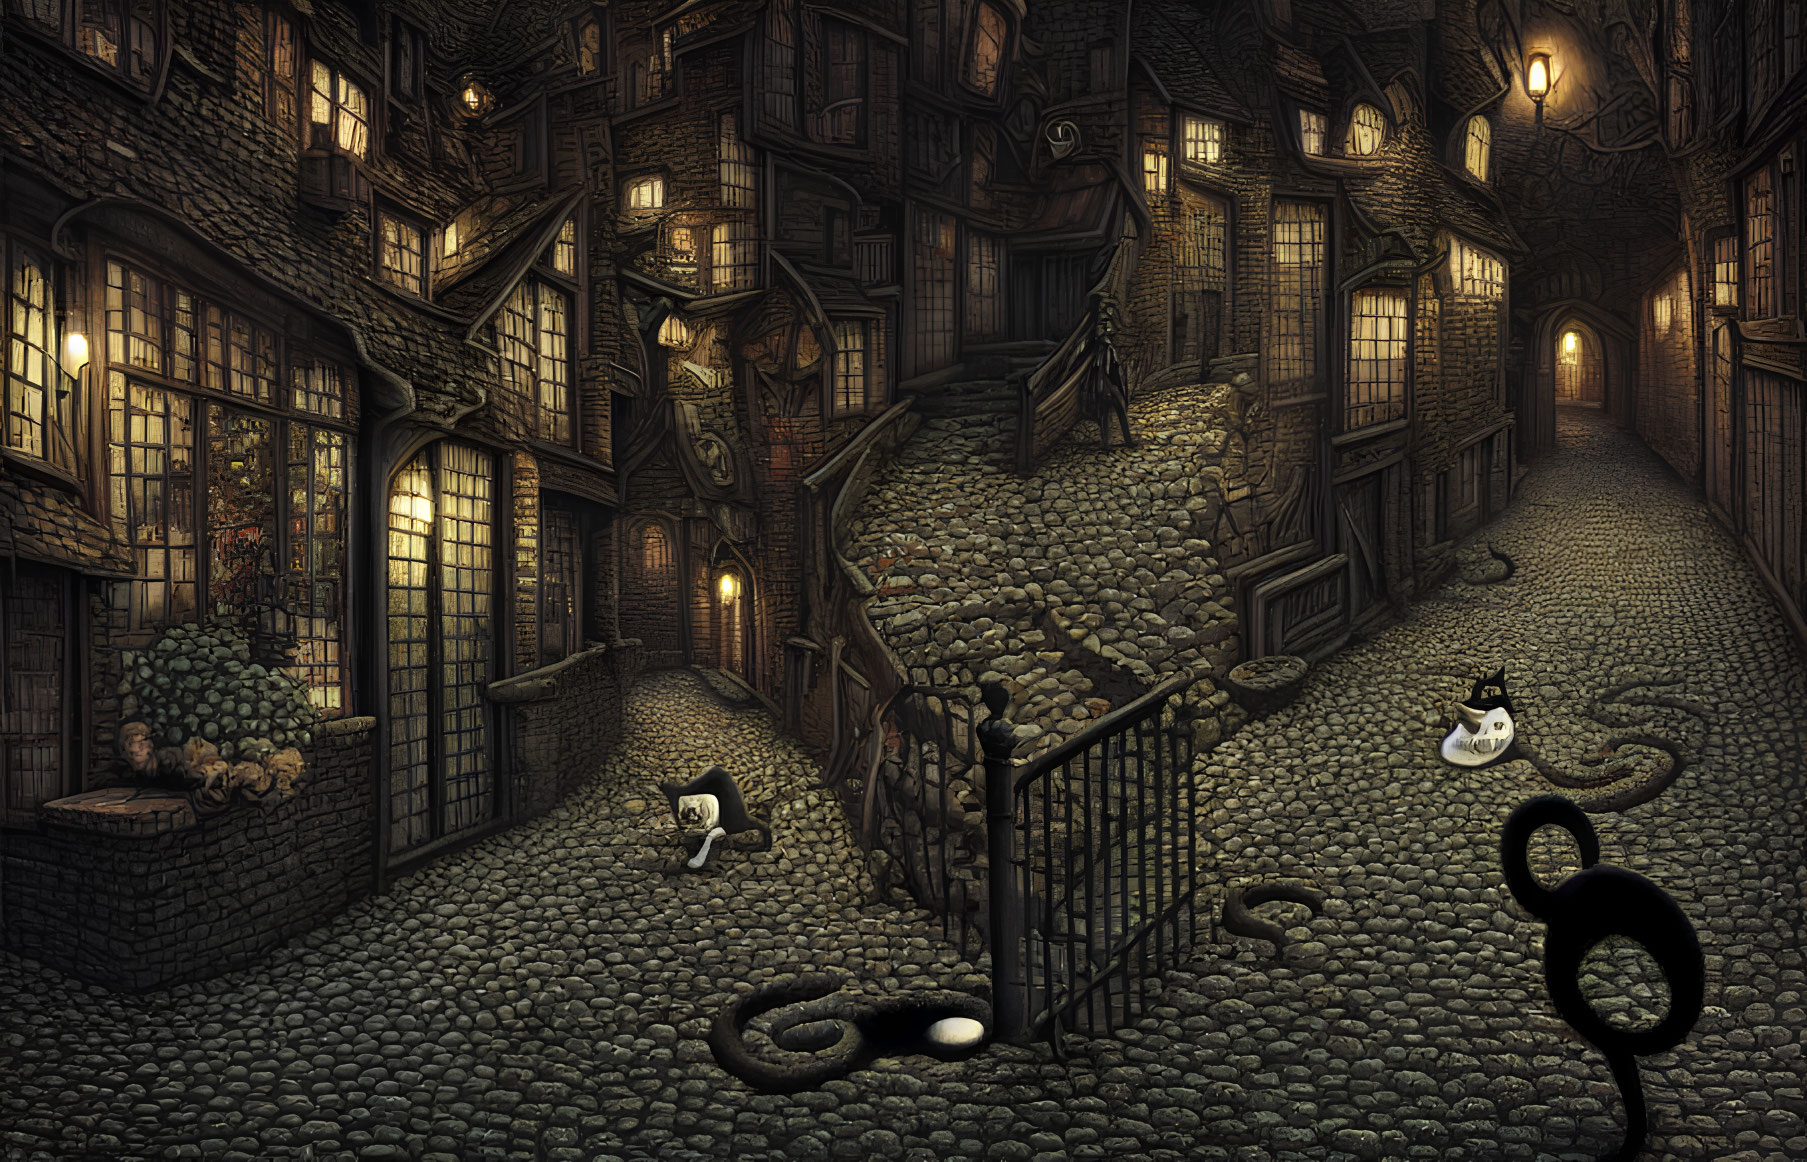 Quaint cobblestone street at night with cats and mysterious tentacles